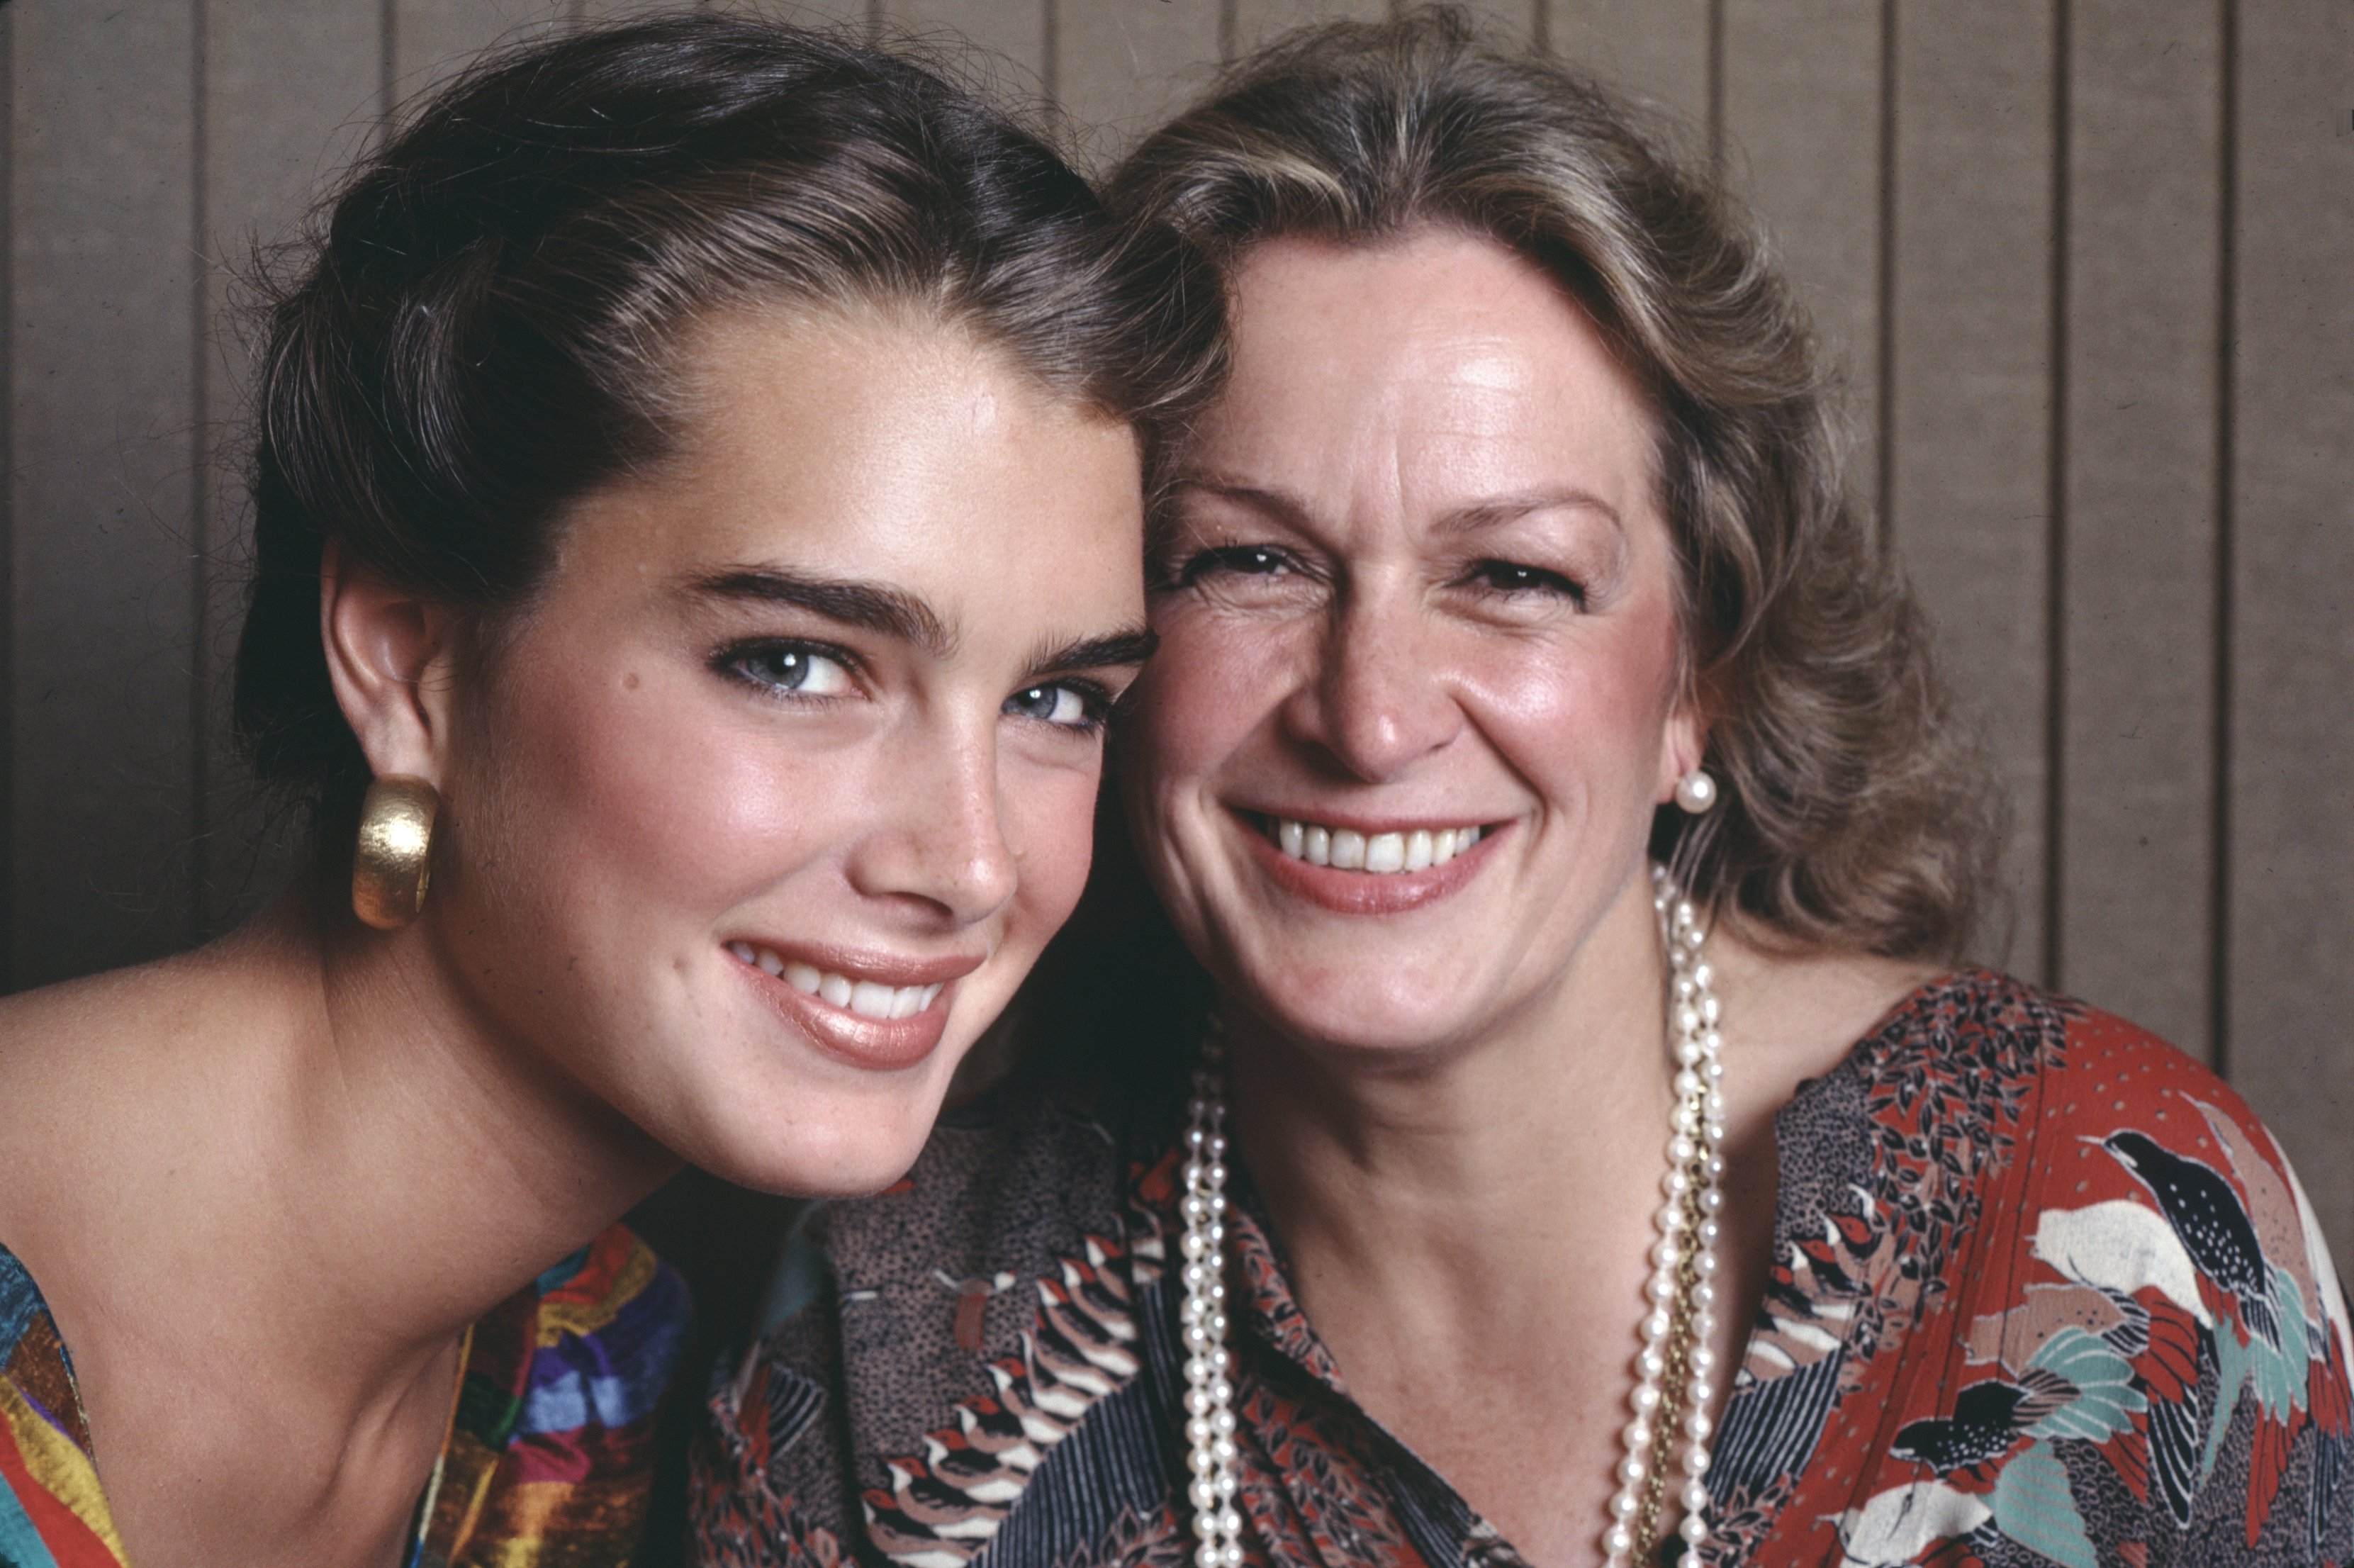 Brooke Shields and Teri Shields photographed in 1981 in New York, New York. / Source: Getty Images